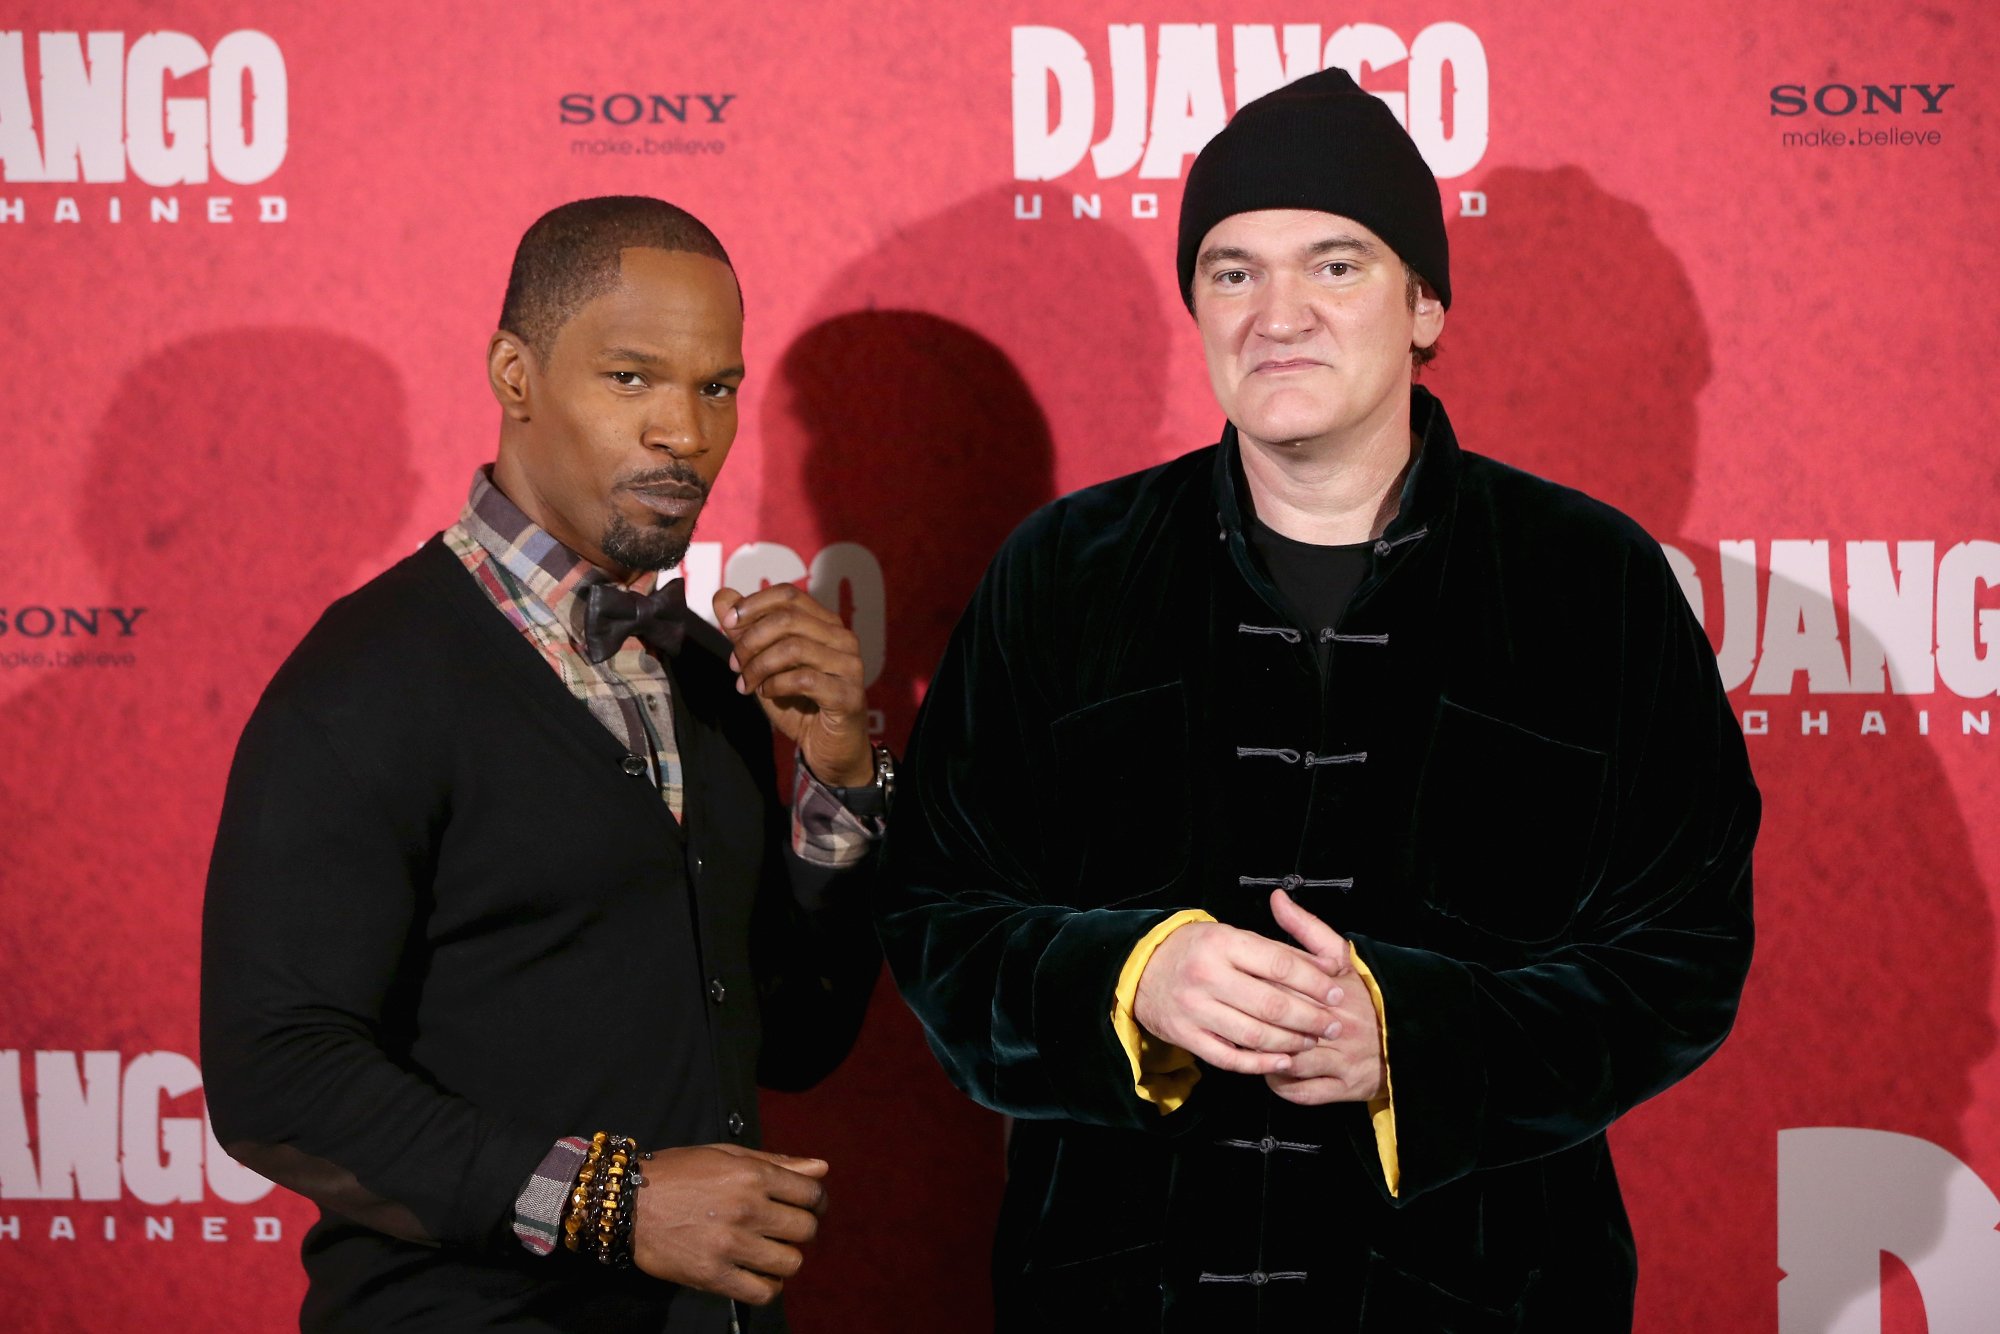 'Django Unchained' Jamie Foxx and Quentin Tarantino standing in front of red movie step and repeat